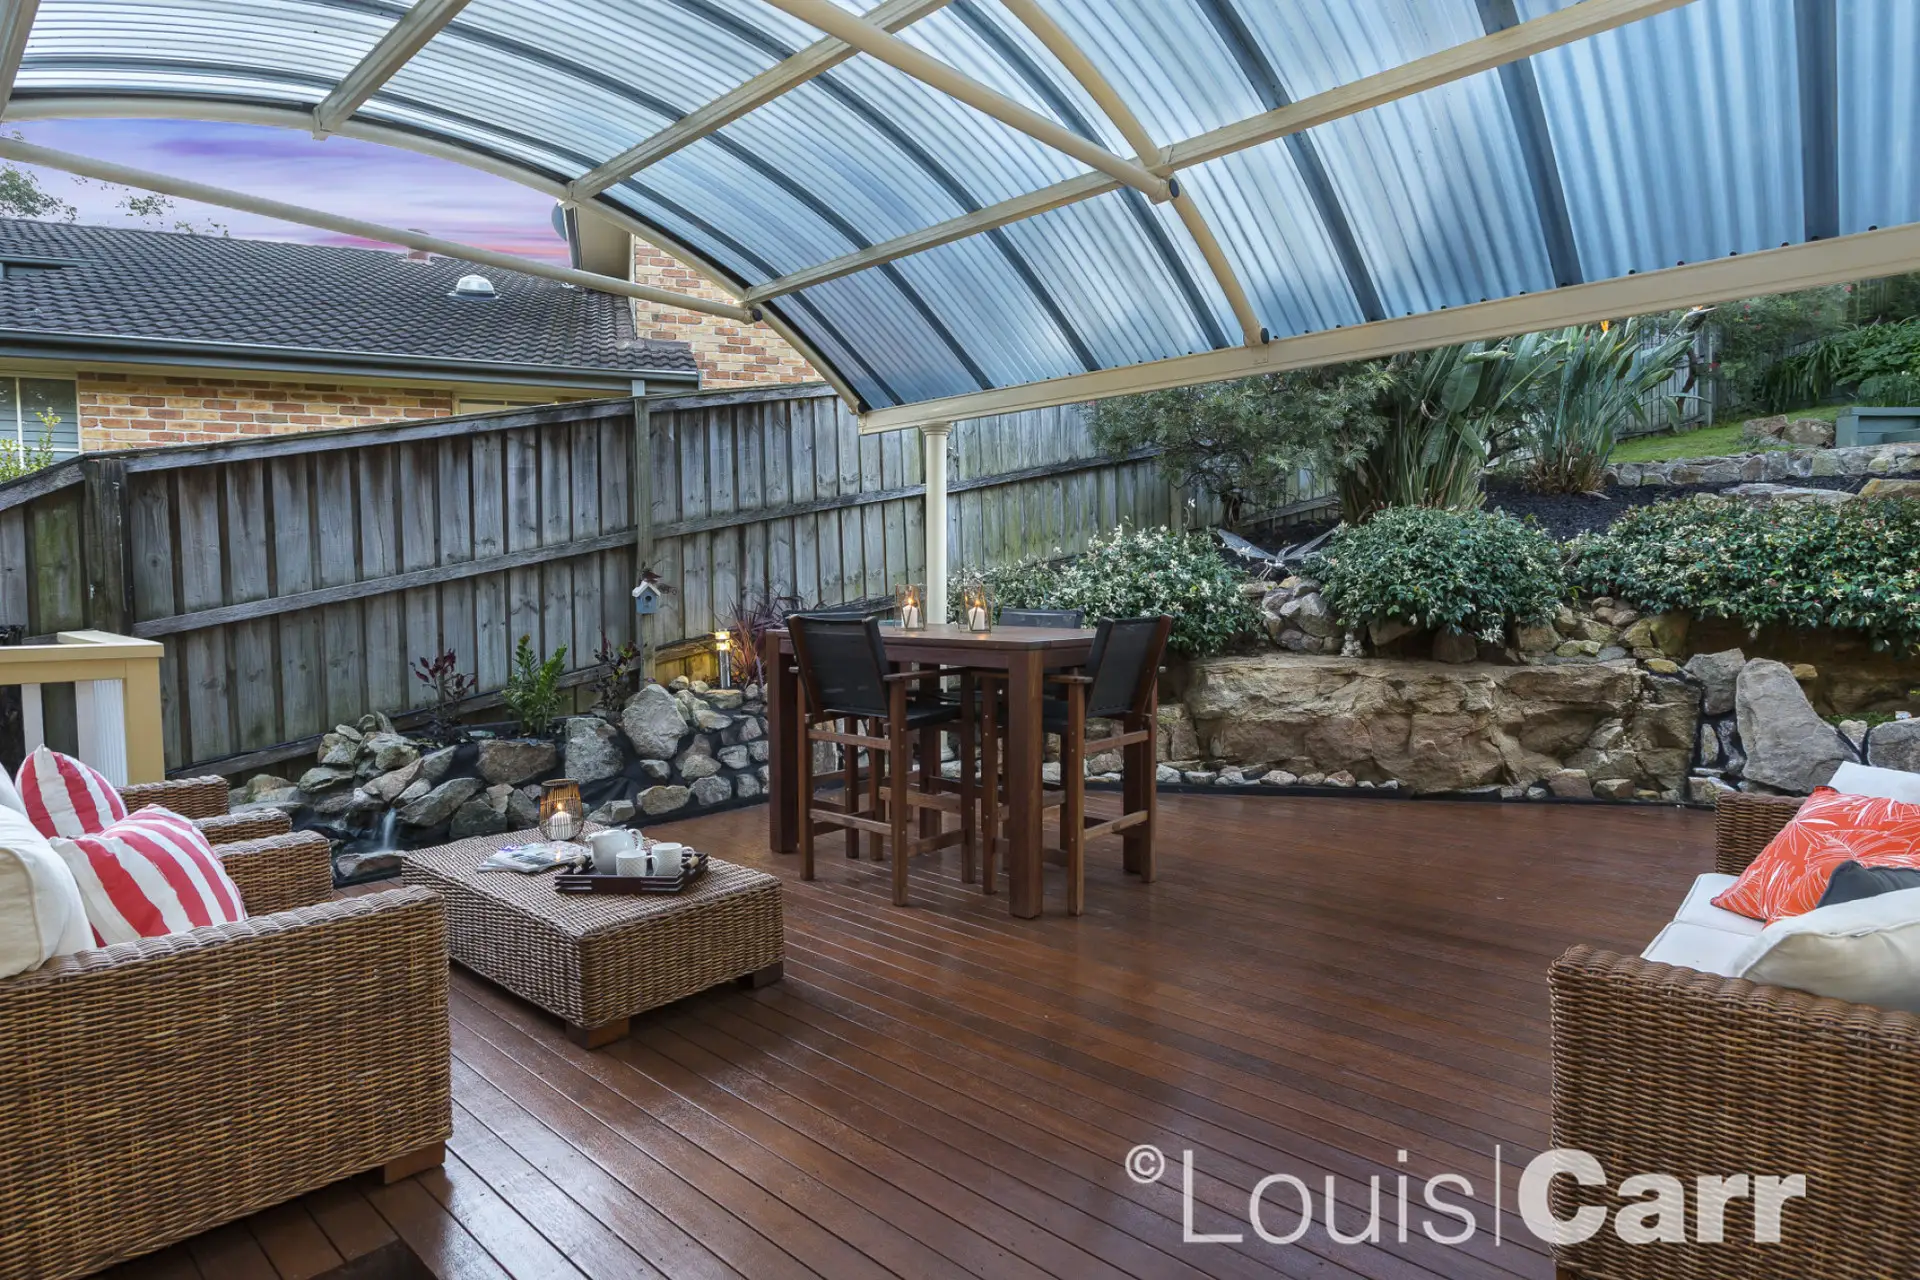 Photo #4: 15 Wollemi Place, Dural - Sold by Louis Carr Real Estate